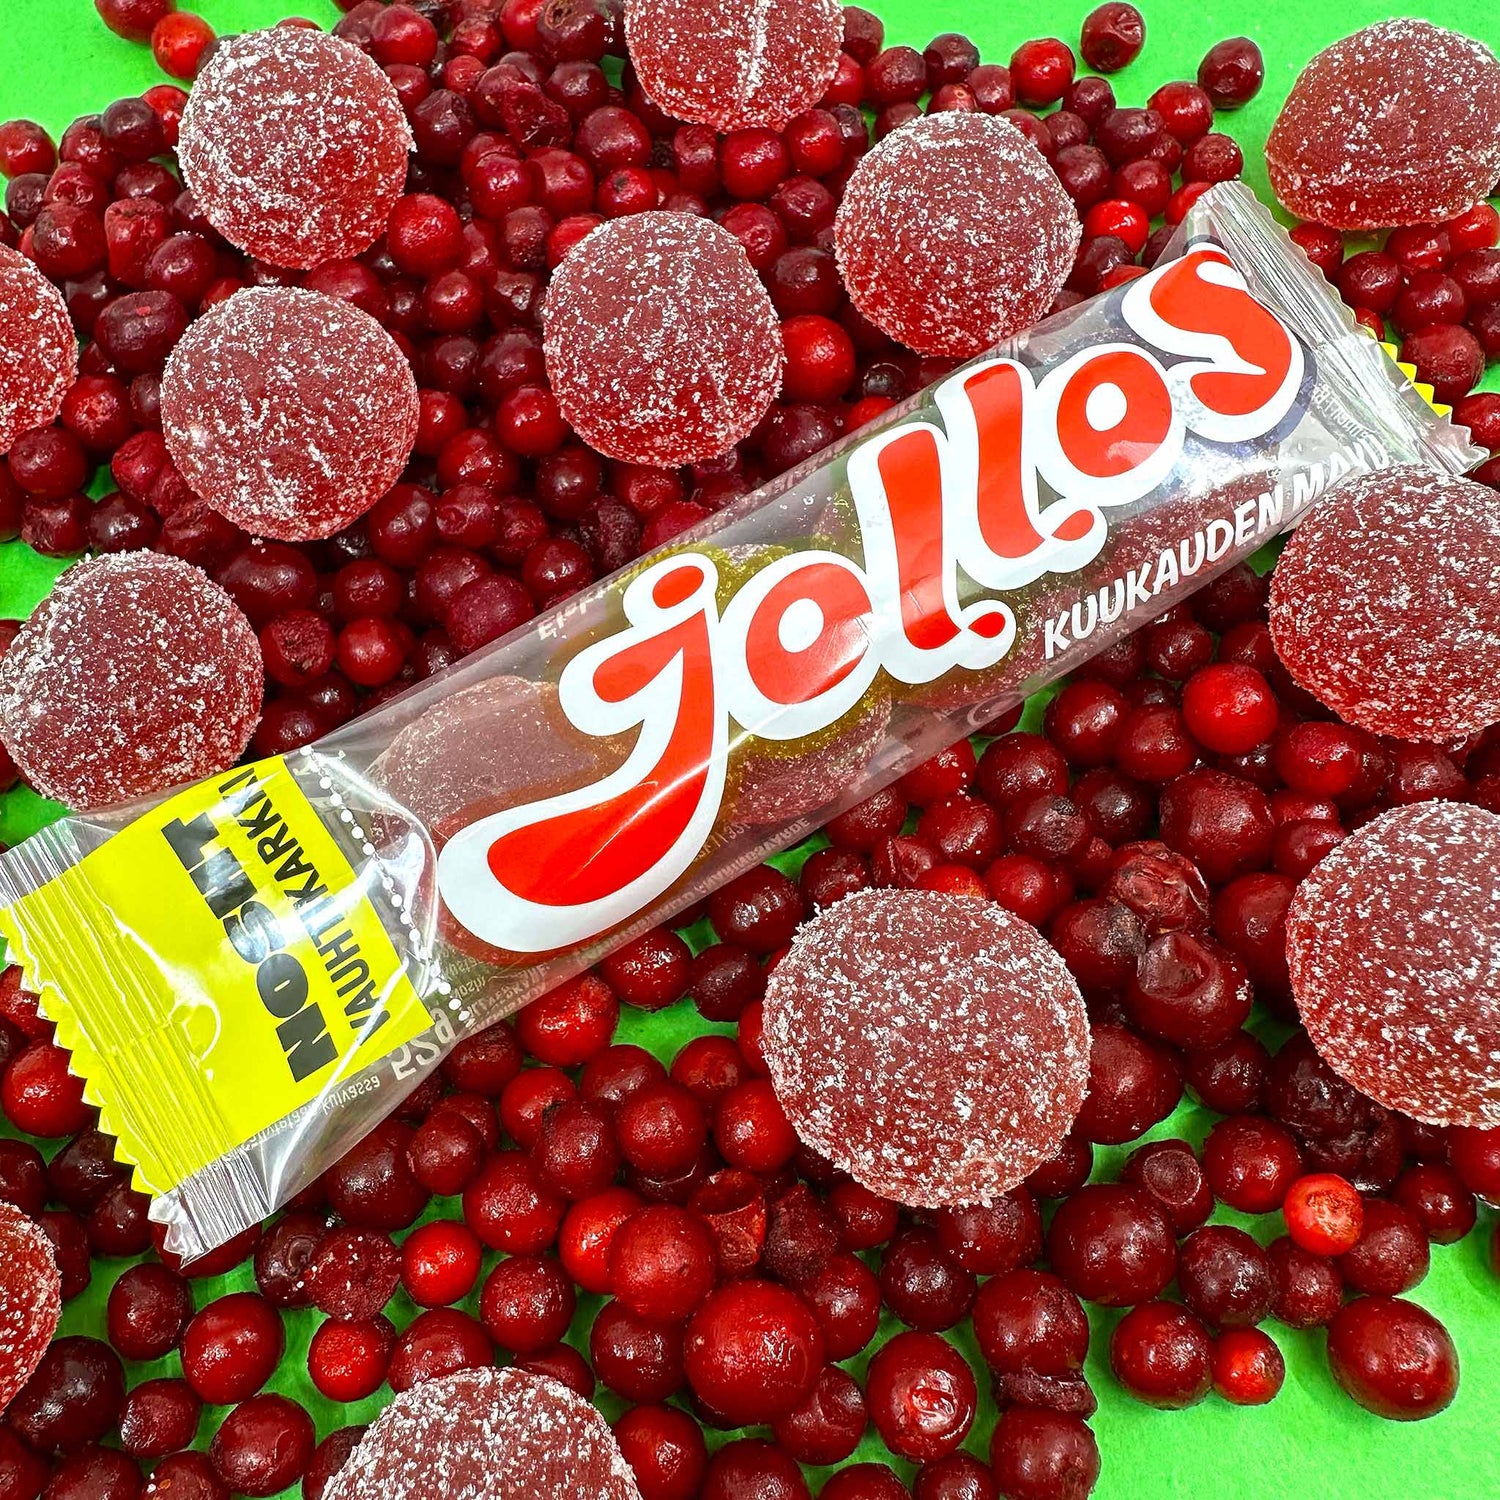 Jollos Flavour of the month